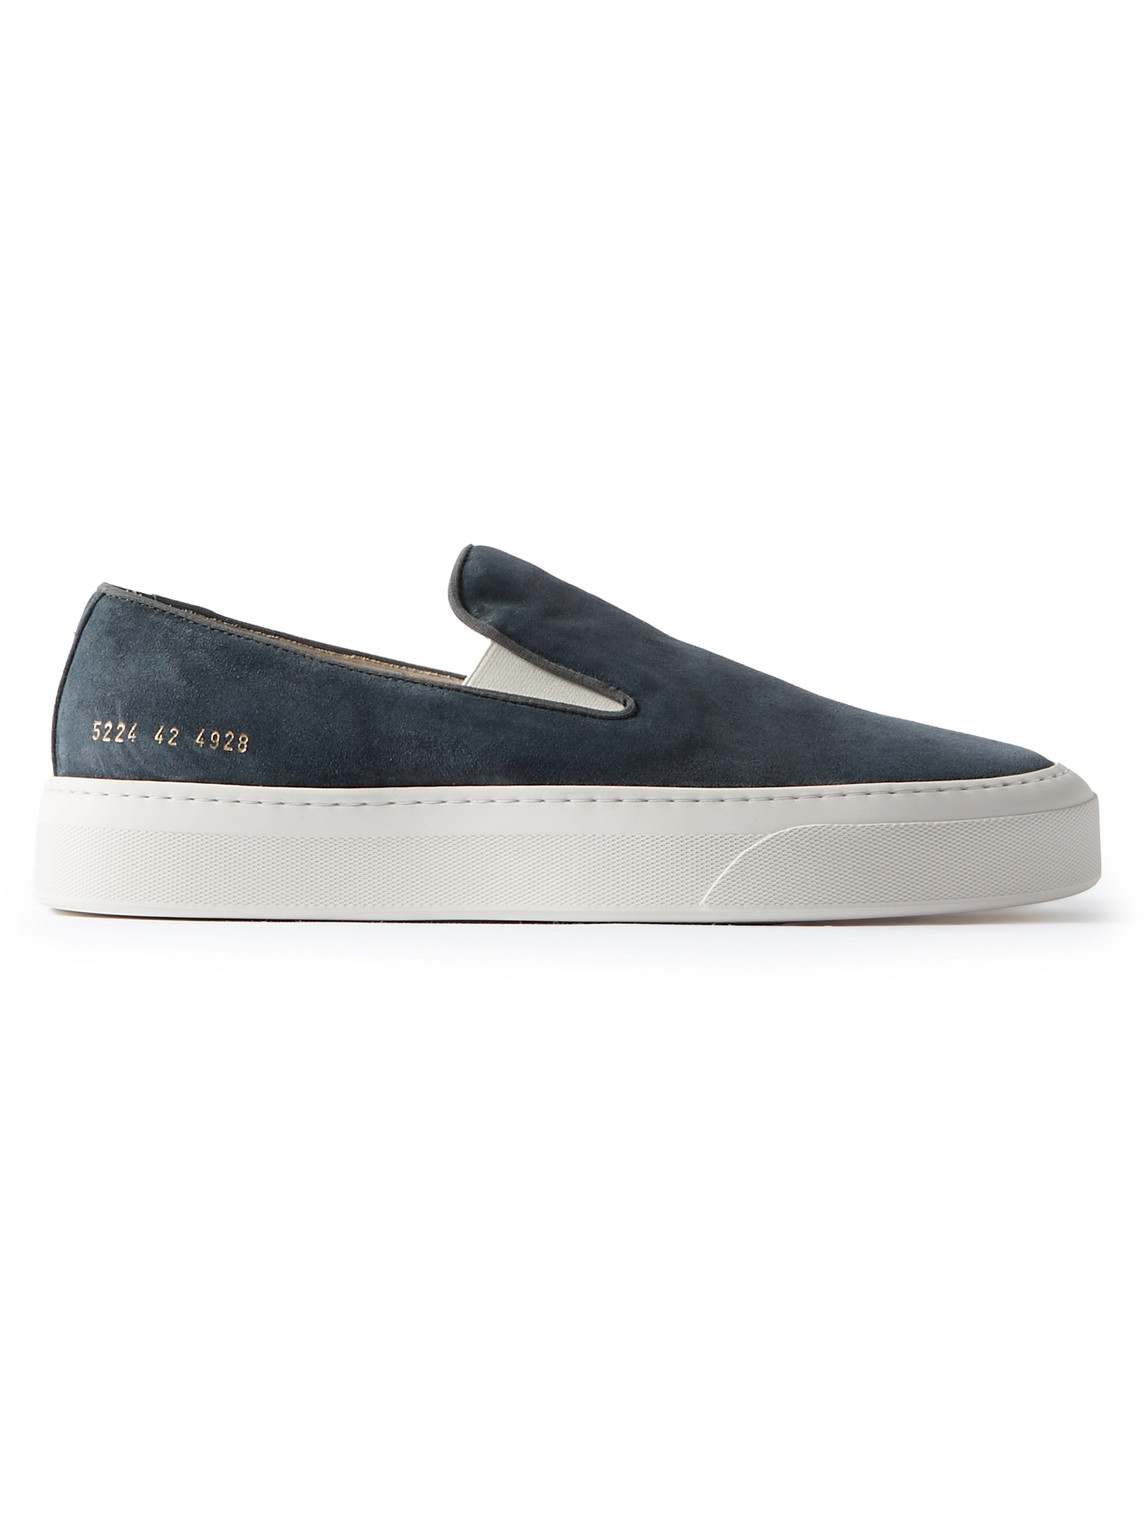 COMMON PROJECTS SUEDE SLIP-ON SNEAKERS